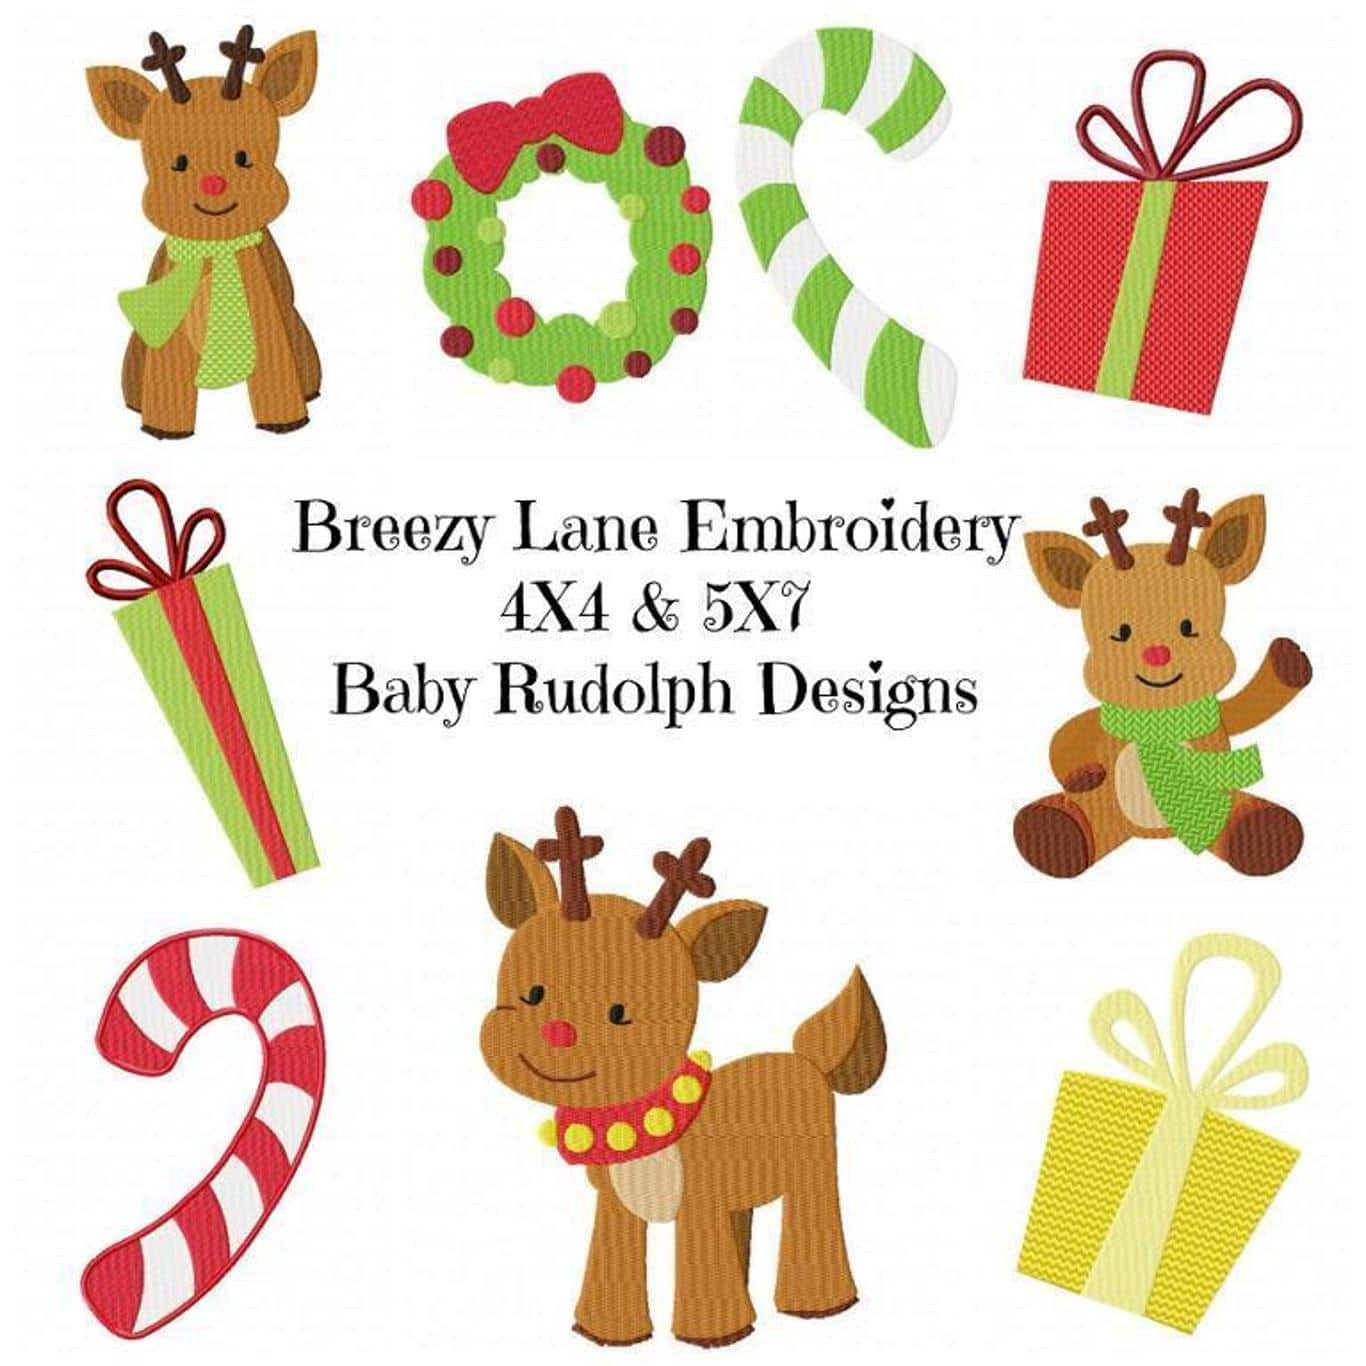 rudolphchristmasembroiderydesignset by Brezzy Lane Embroidery The Most Special Free and Paid Rudolph Christmas Embroidery Designs